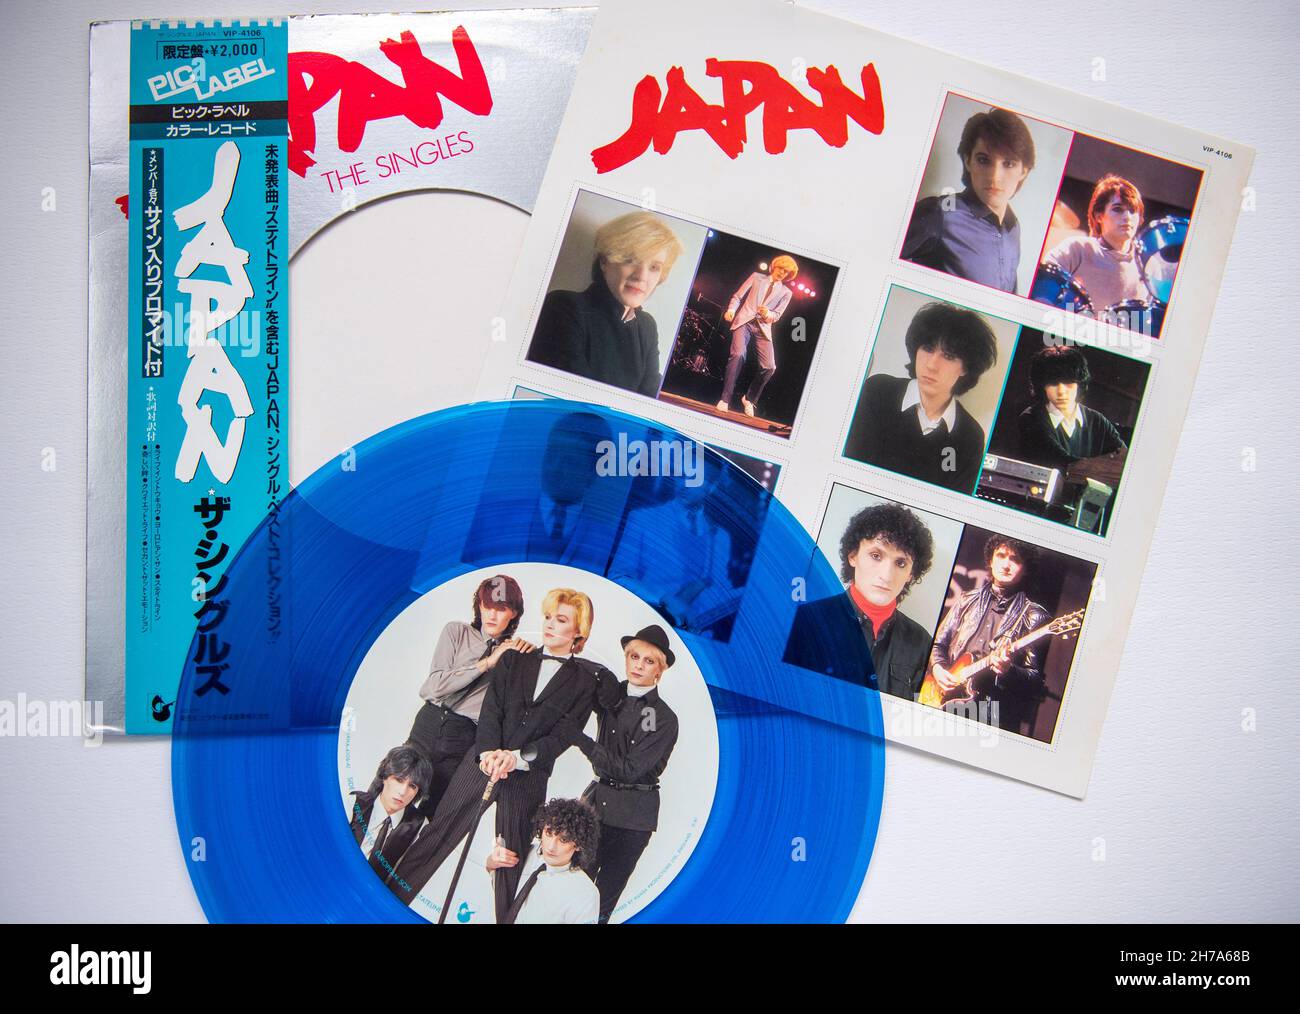 Limited edition blue vinyl Japanese import of The Singles by British band Japan Stock Photo